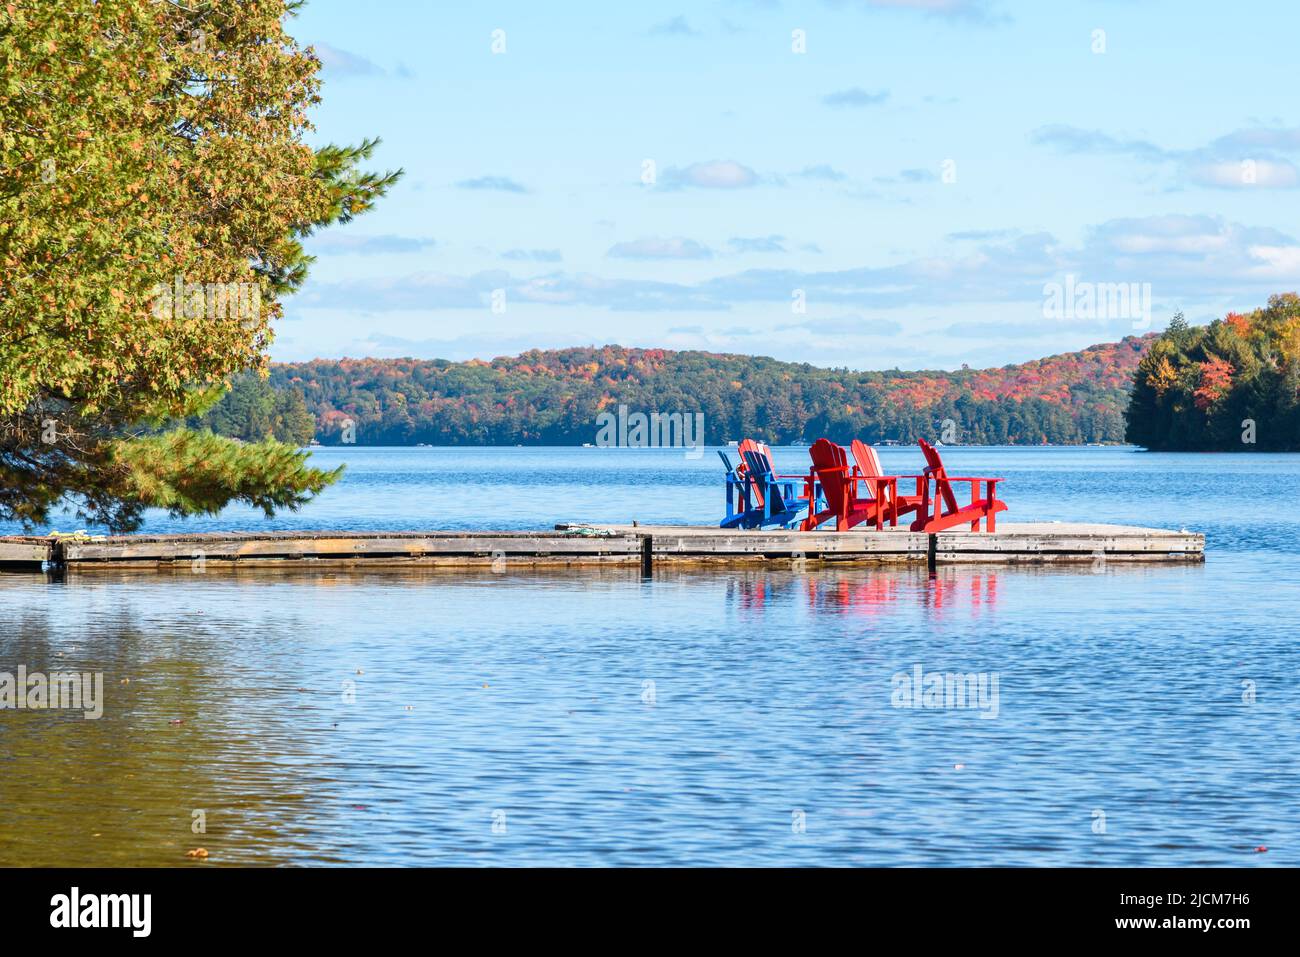 Colourful adirondack chairs on a floating jetty on a lake with forested shores on a sunny autumn day. Fall foliage. Stock Photo